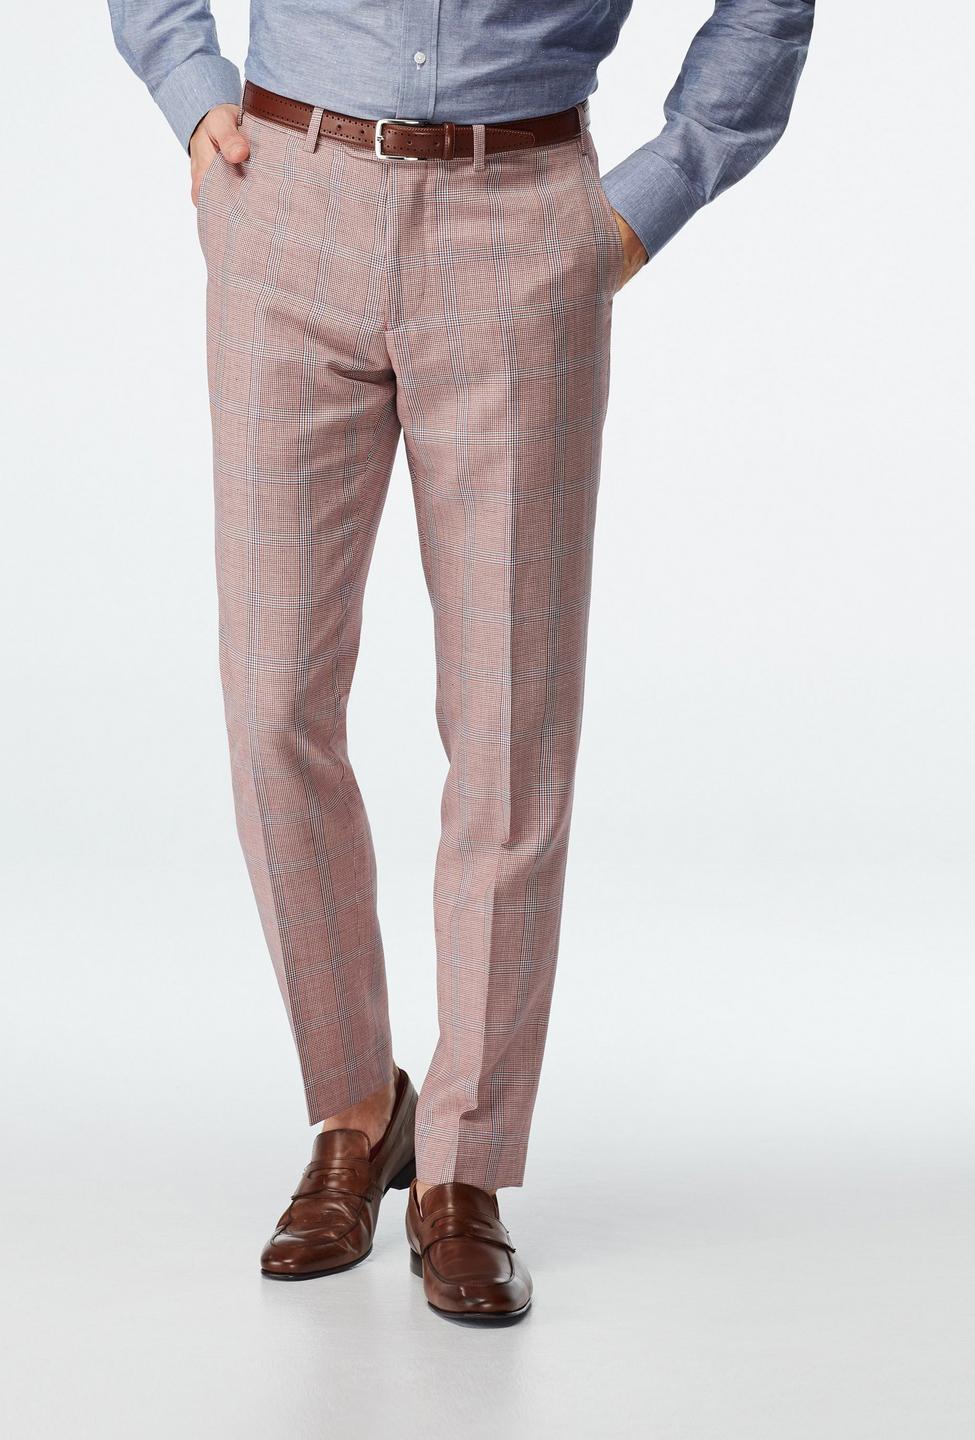 Red pants - Southport Houndstooth Design from Seasonal Indochino Collection